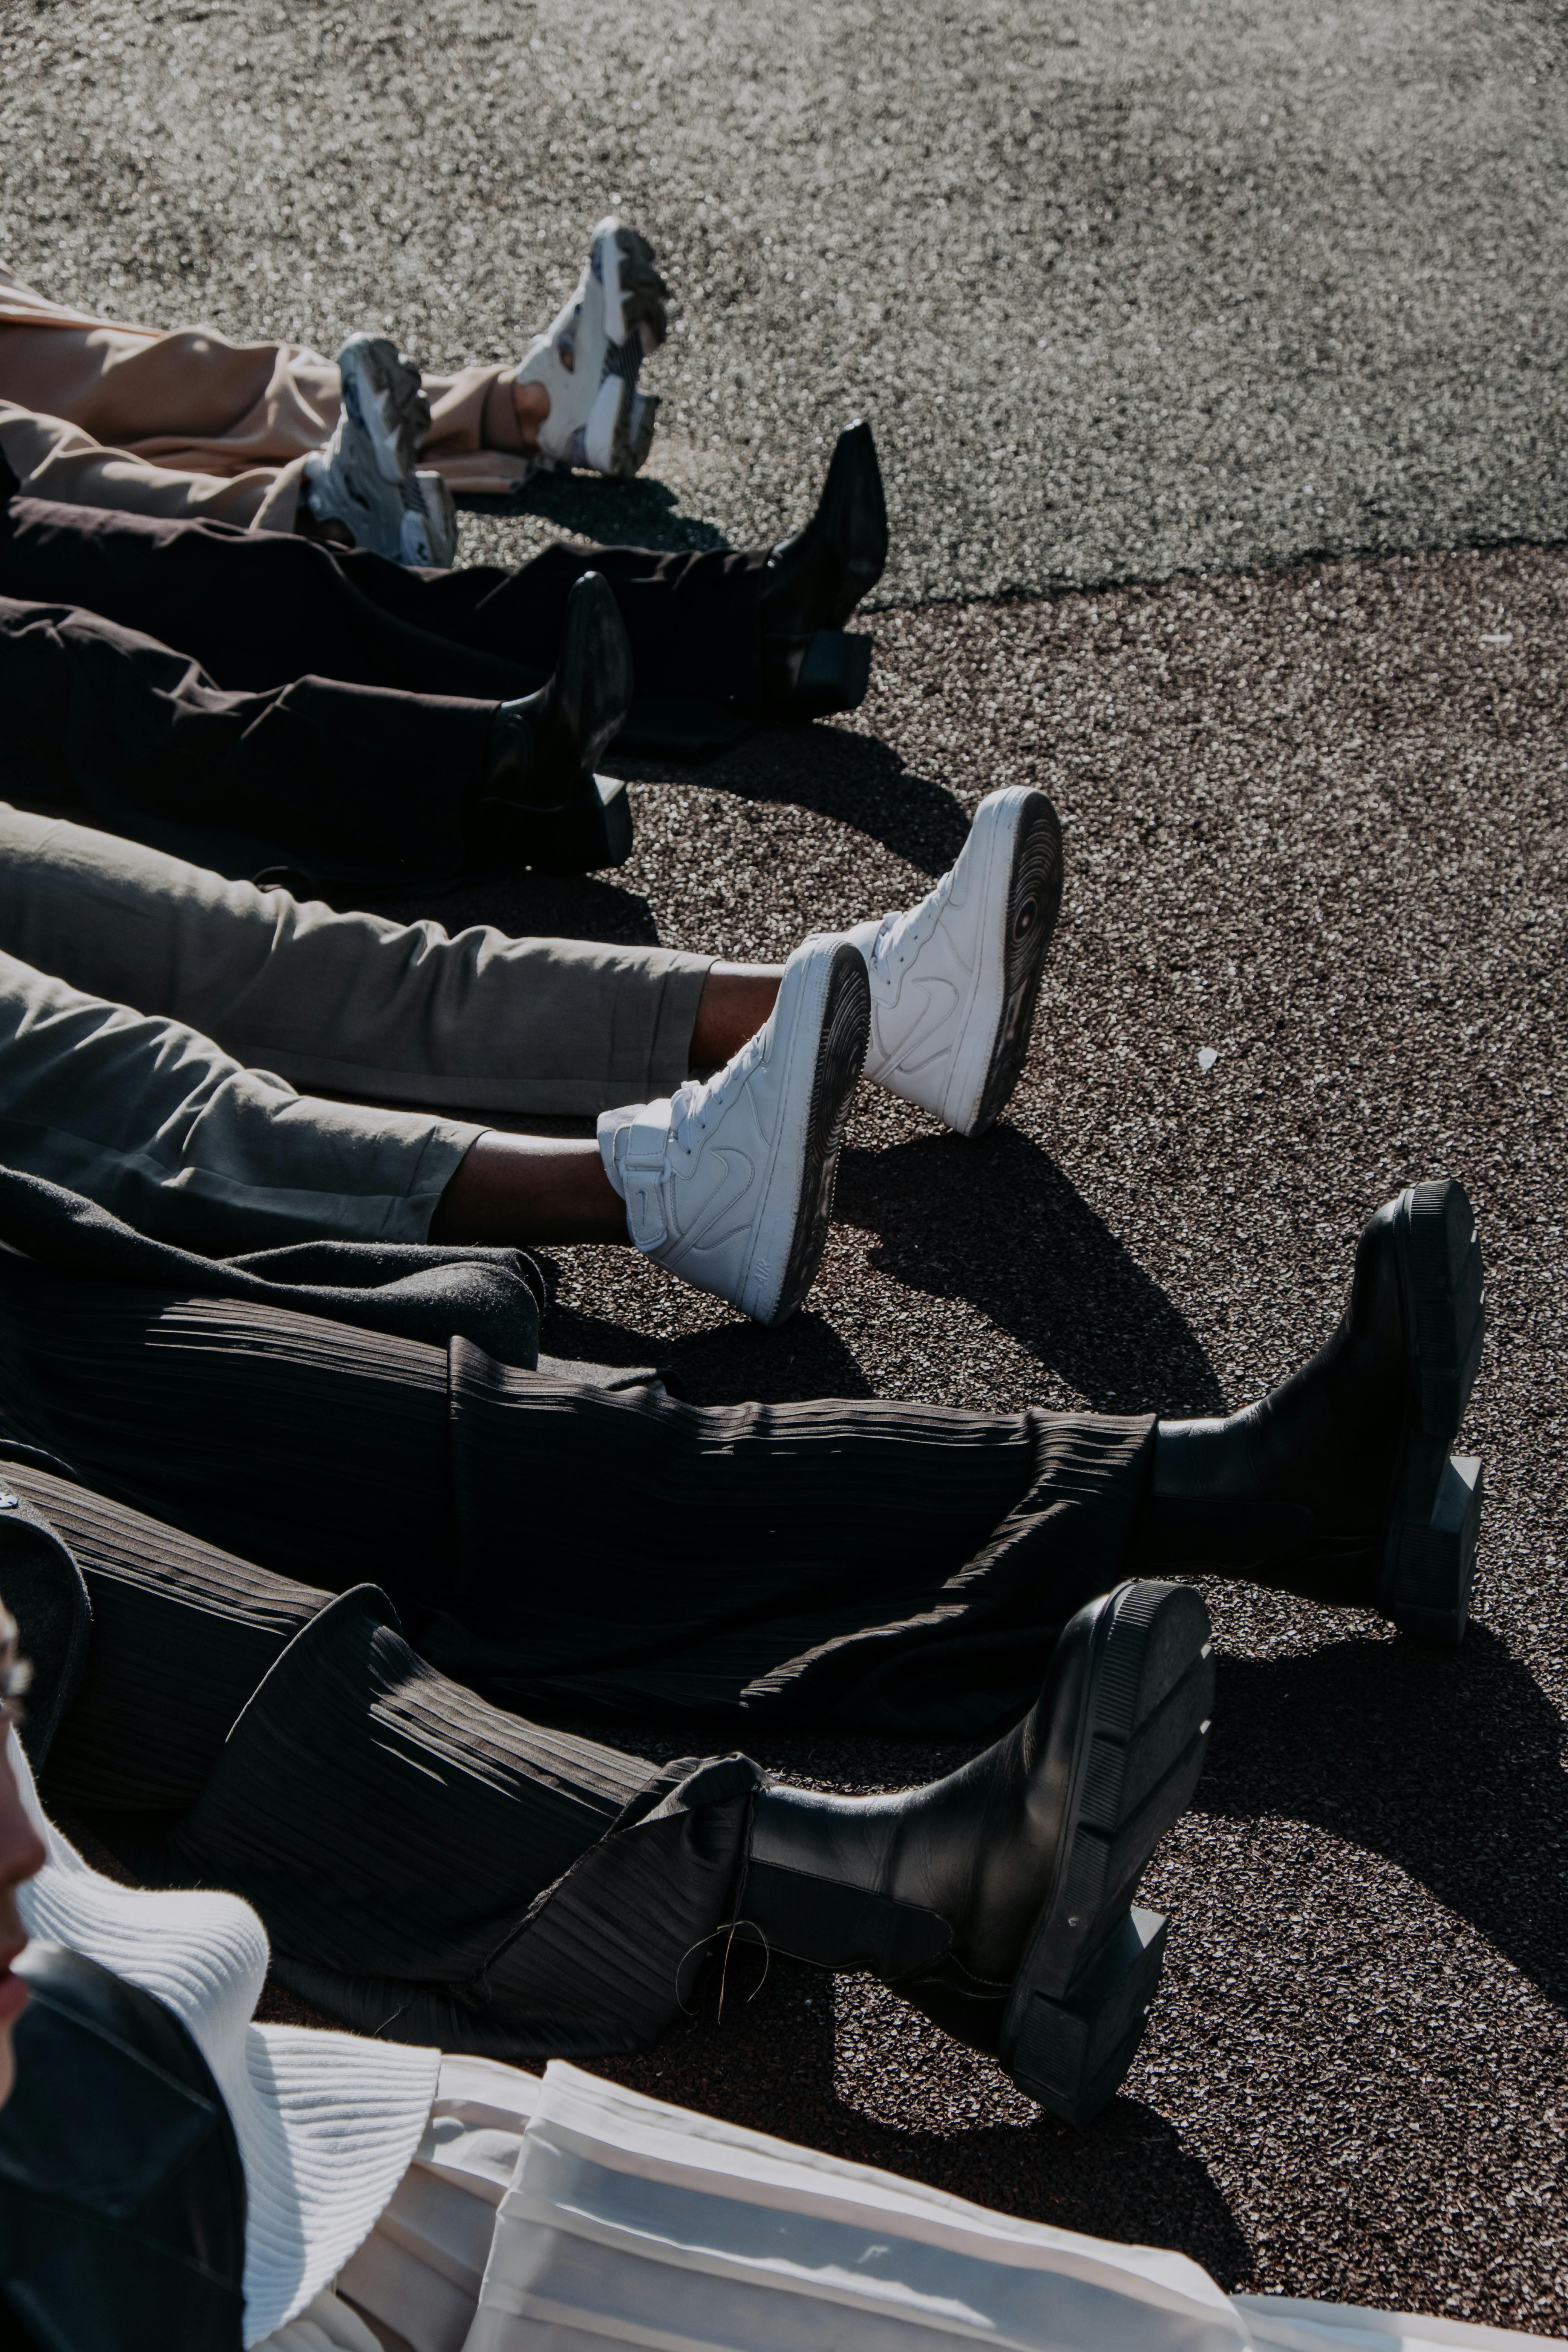 people lying on ground showing different pairs of shoes